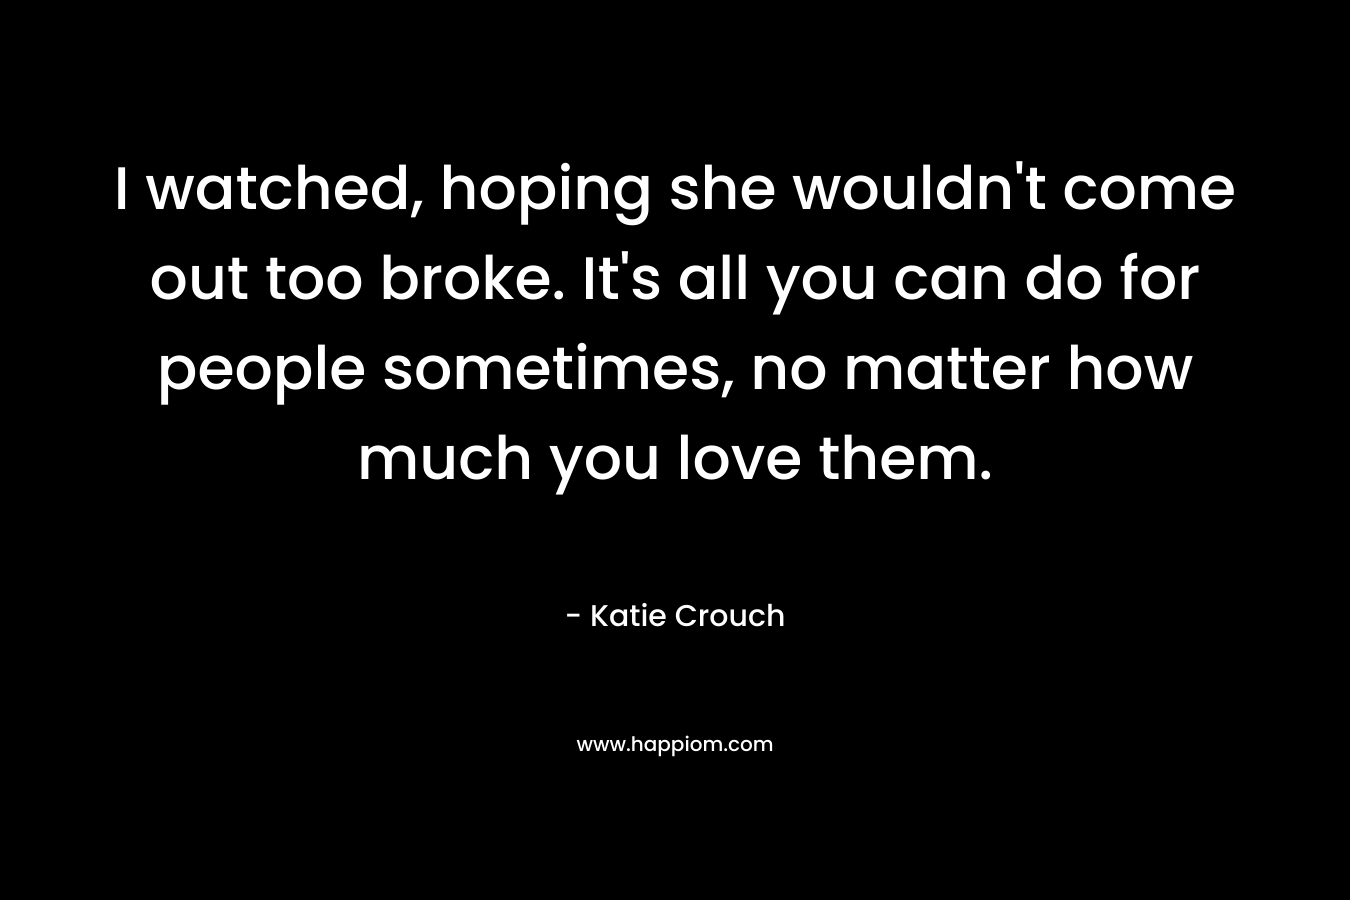 I watched, hoping she wouldn’t come out too broke. It’s all you can do for people sometimes, no matter how much you love them. – Katie Crouch